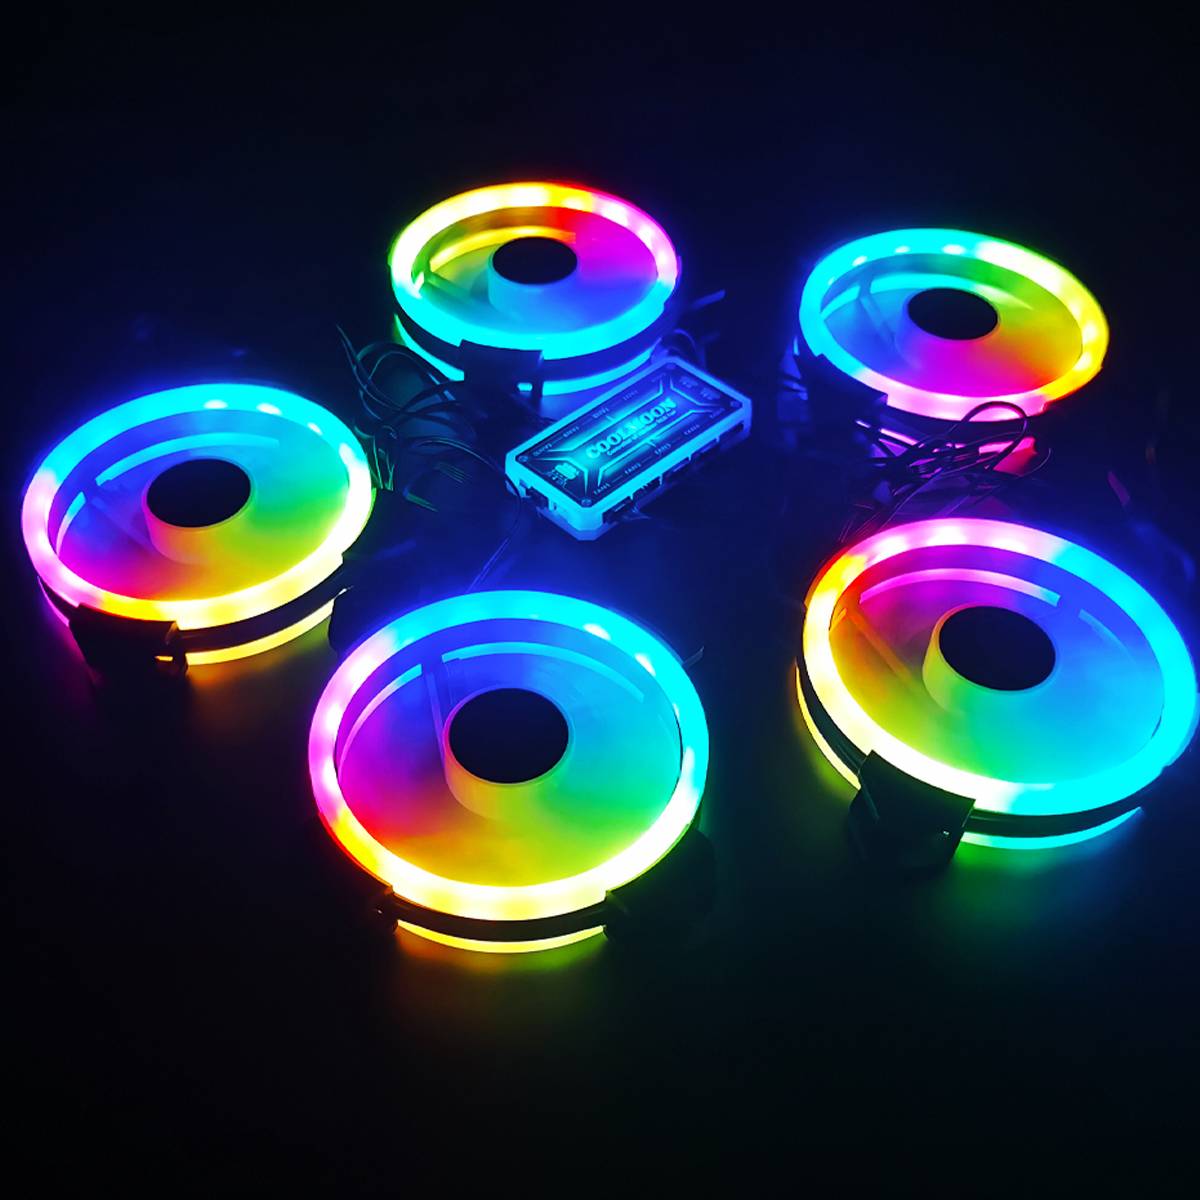 120mm-Computer-PC-Cooler-Cooling-Fan-RGB-LED-Multicolor-mode-Quiet-Chassis-Fan-With-Controller-1940489-5